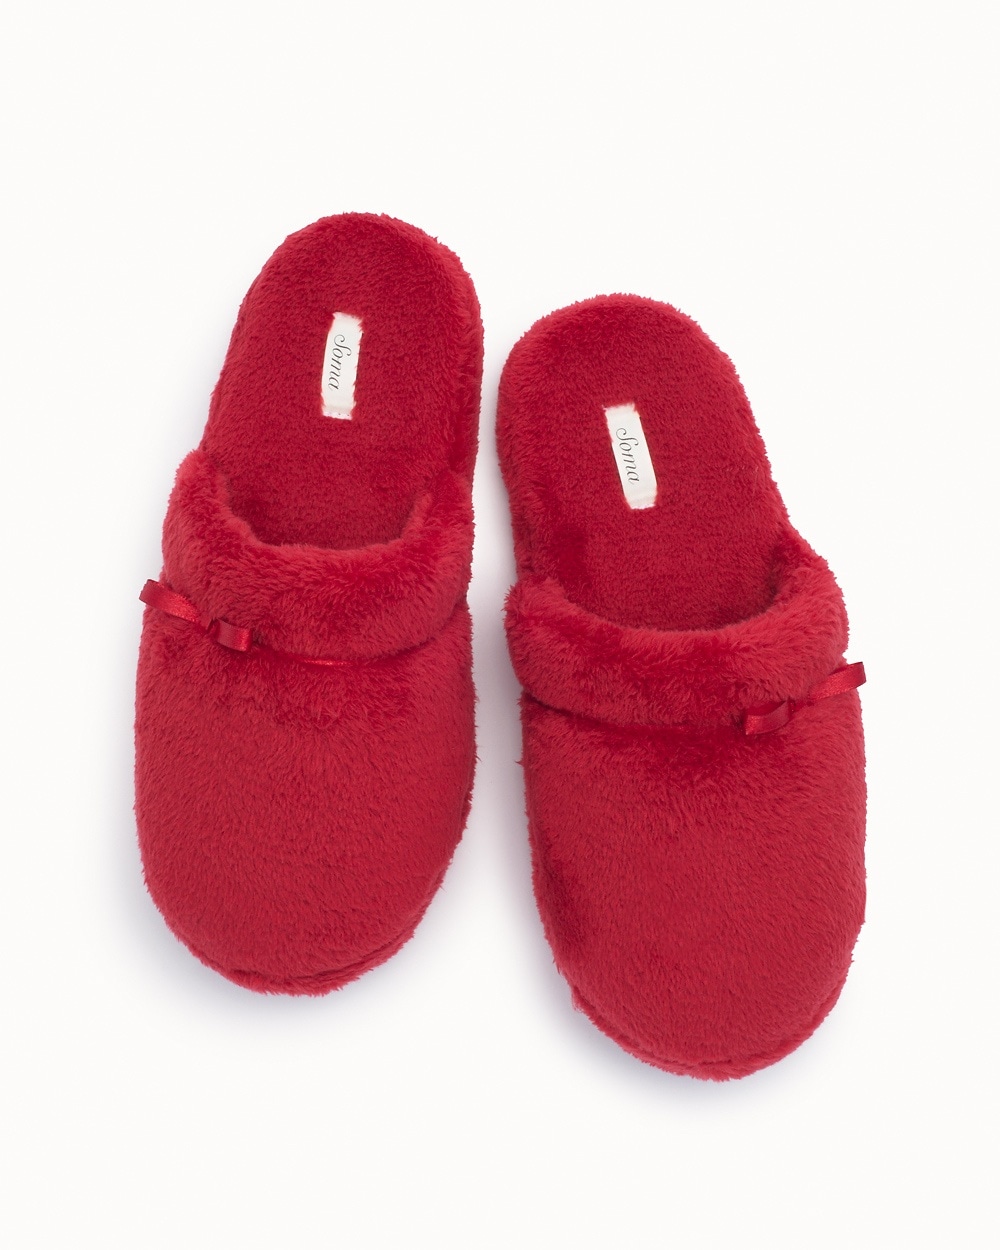 Embraceable Plush Slippers Ruby